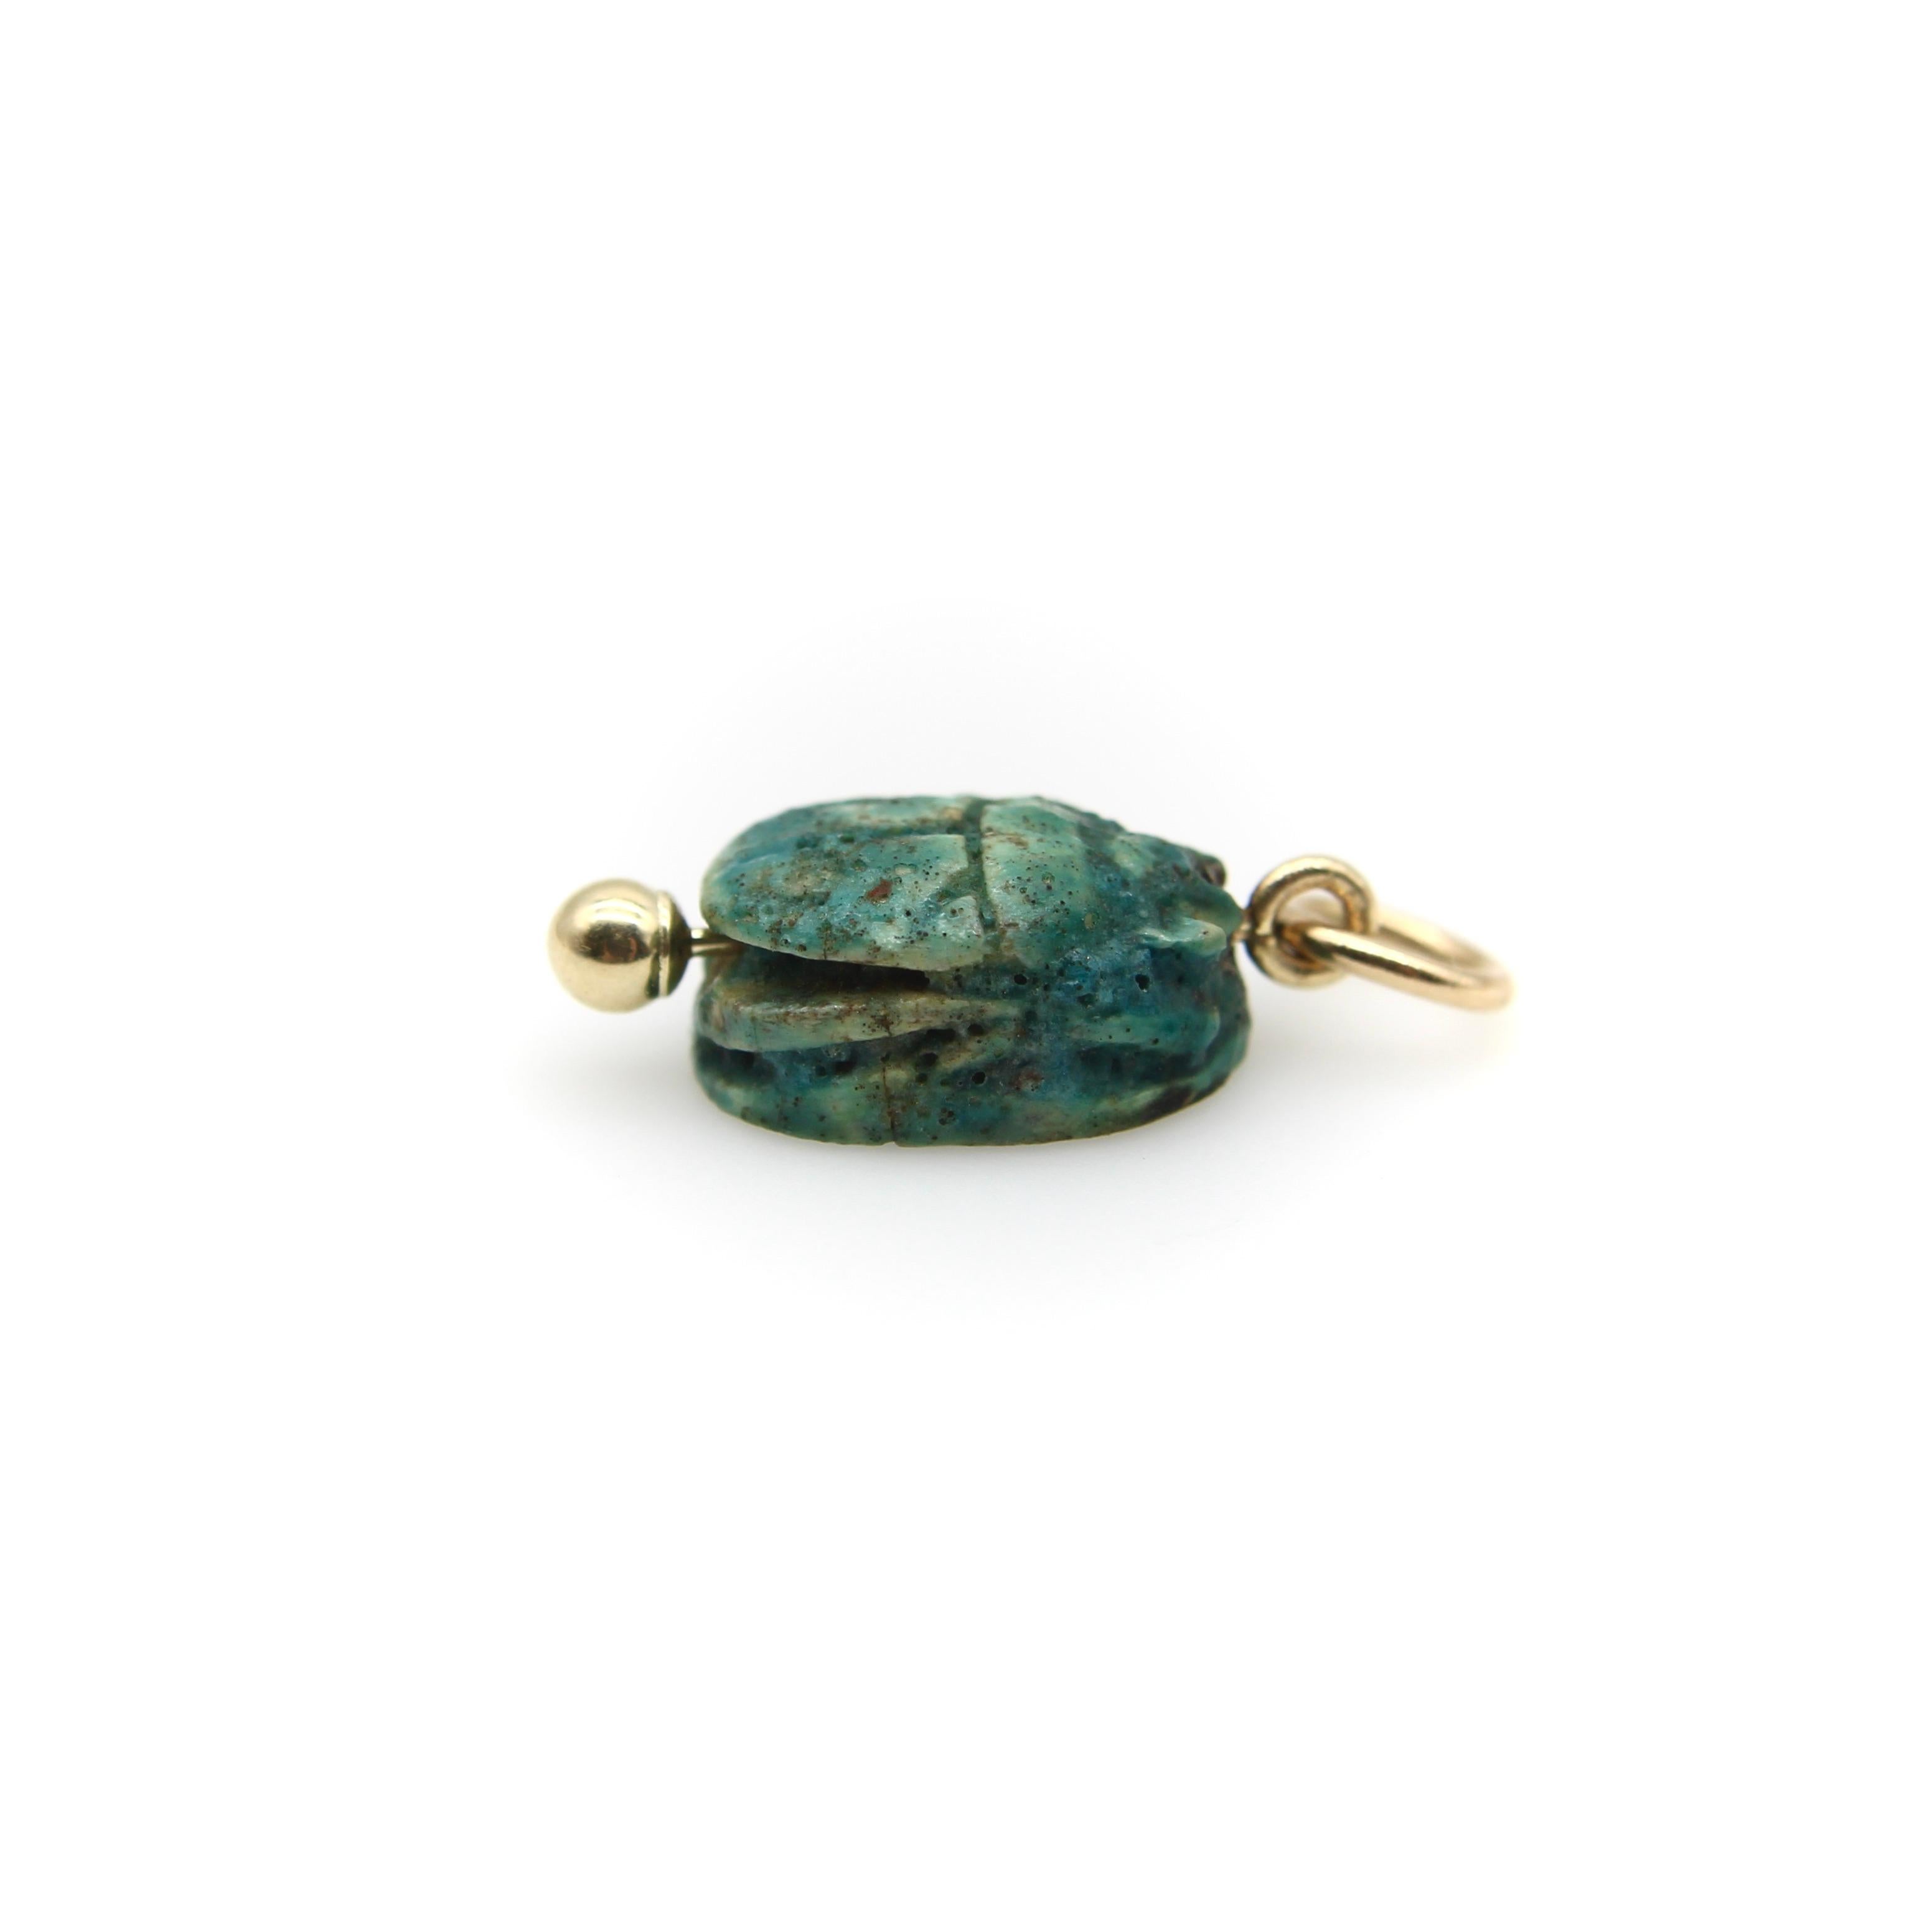 Egyptian Revival Small Turquoise Faience Scarab Pendant with 14K Gold Mount  In Good Condition For Sale In Venice, CA